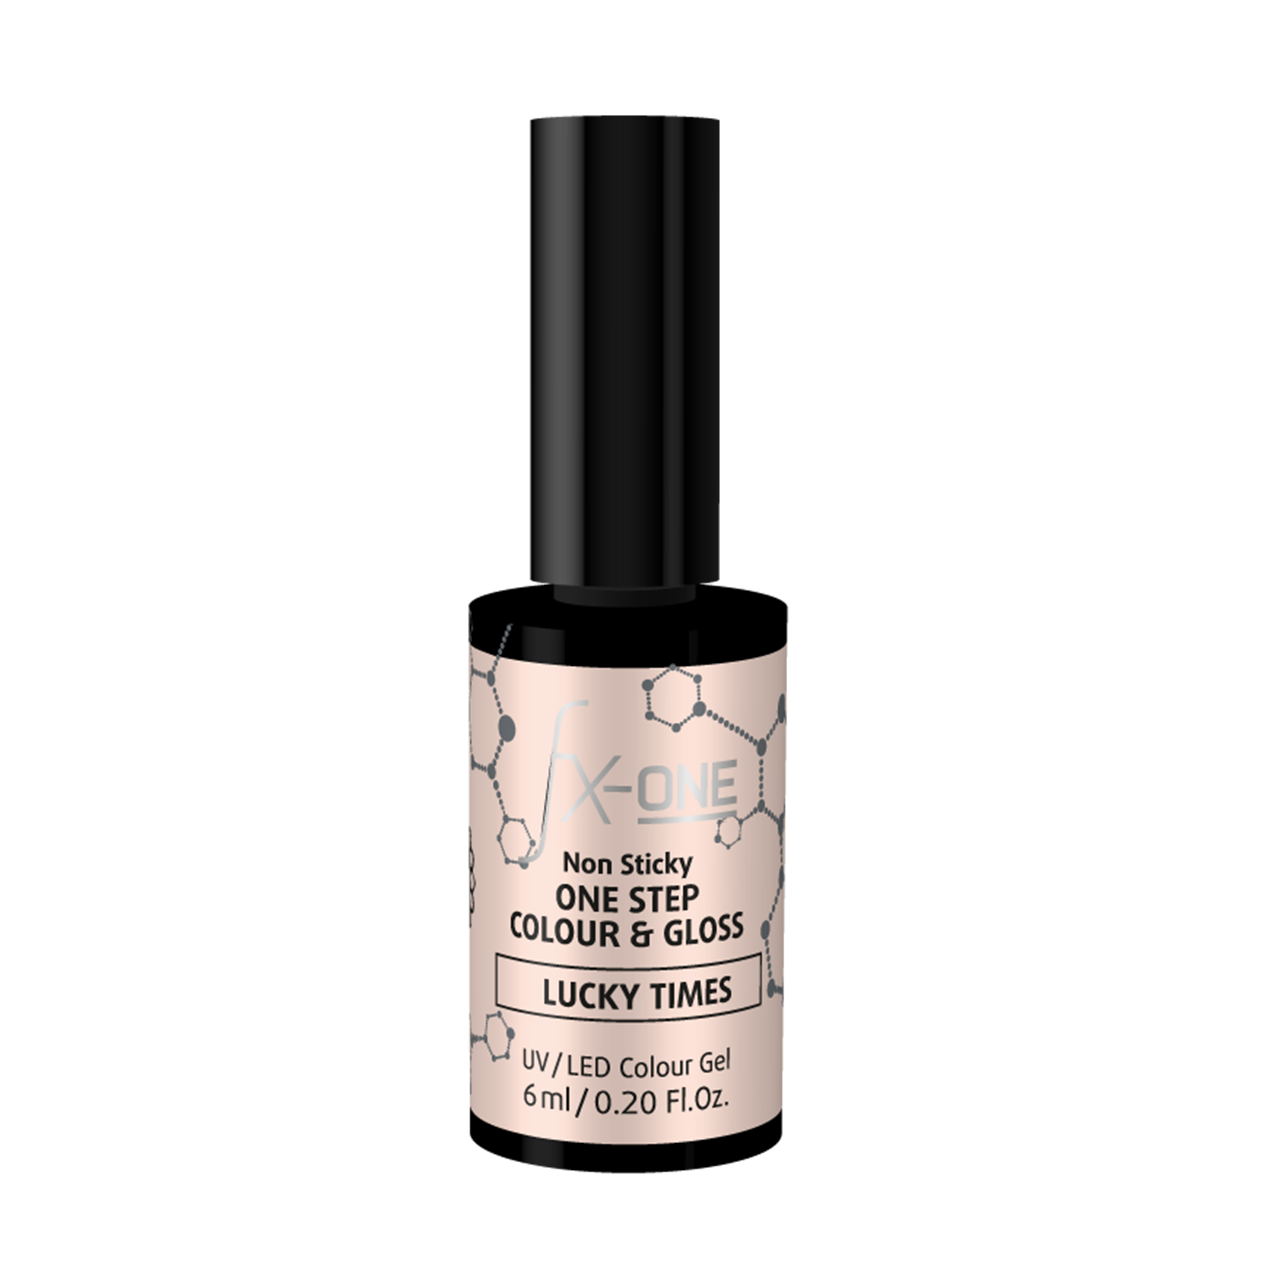 FX-One Colour & Gloss Lucky Times